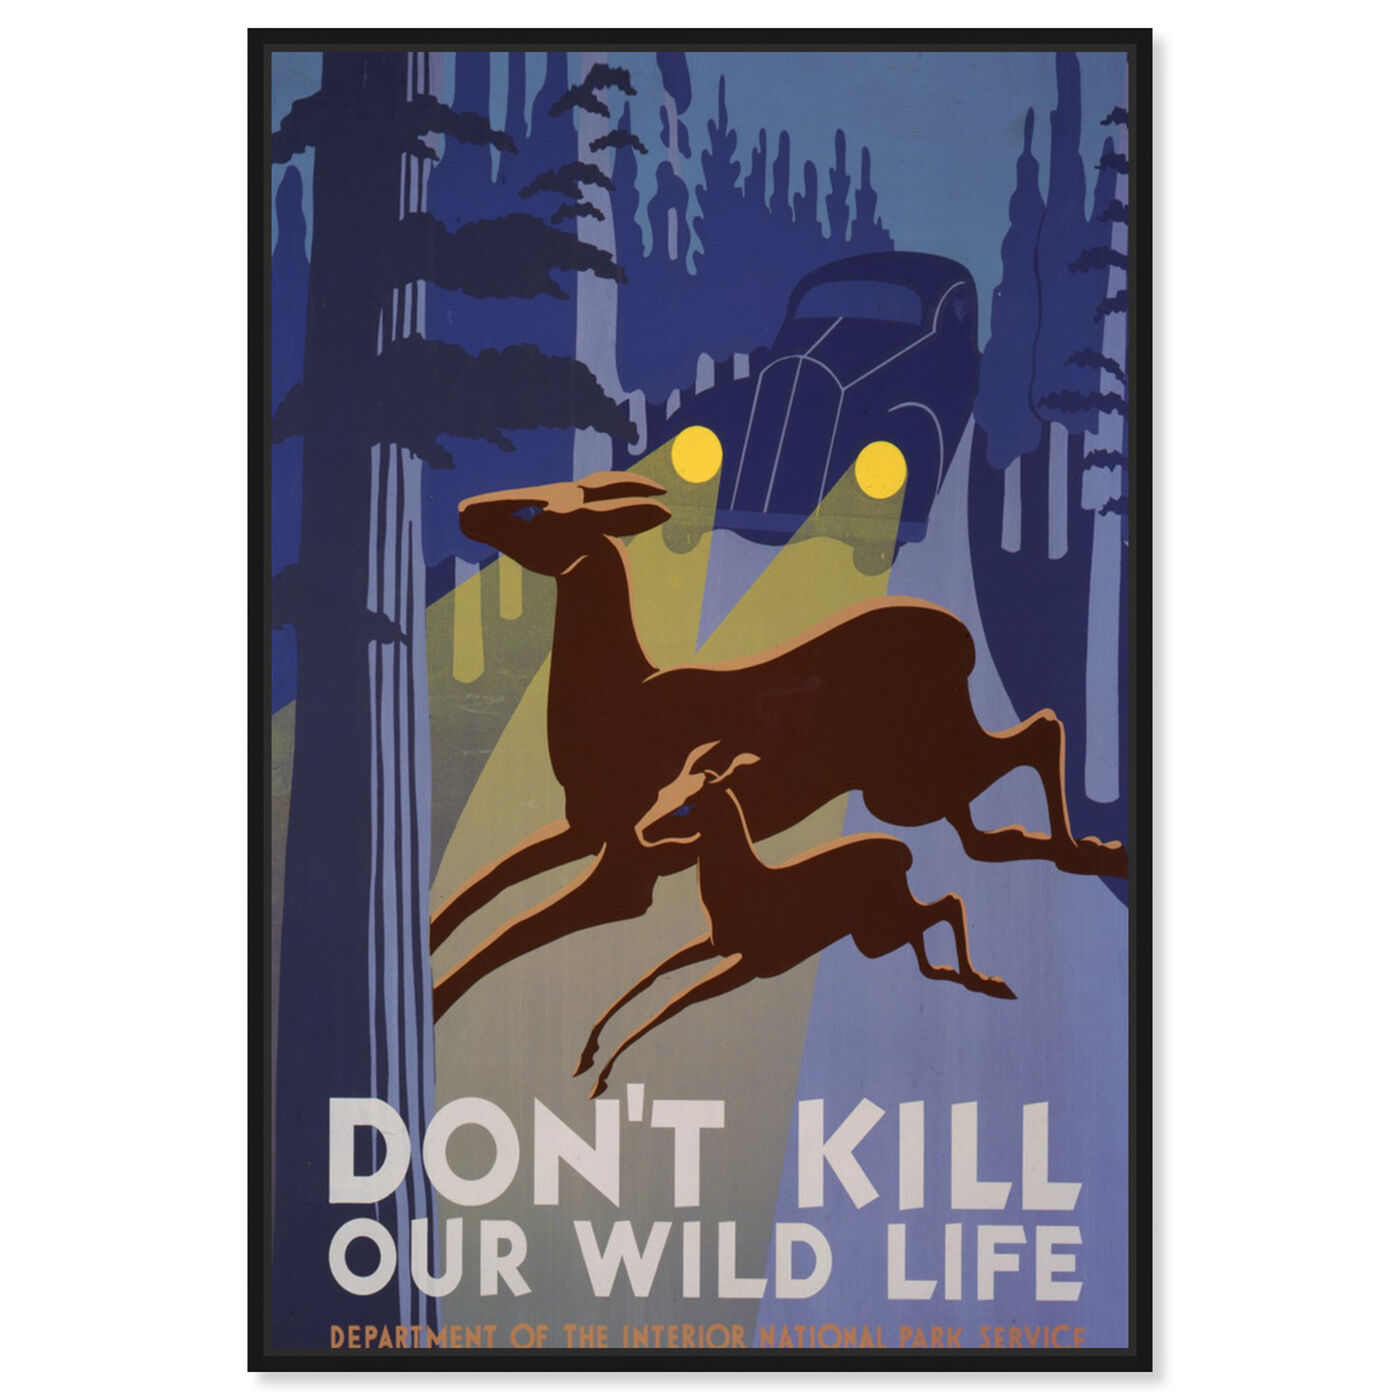 Front view of Don't Kill Our Wild Life featuring advertising and posters art.